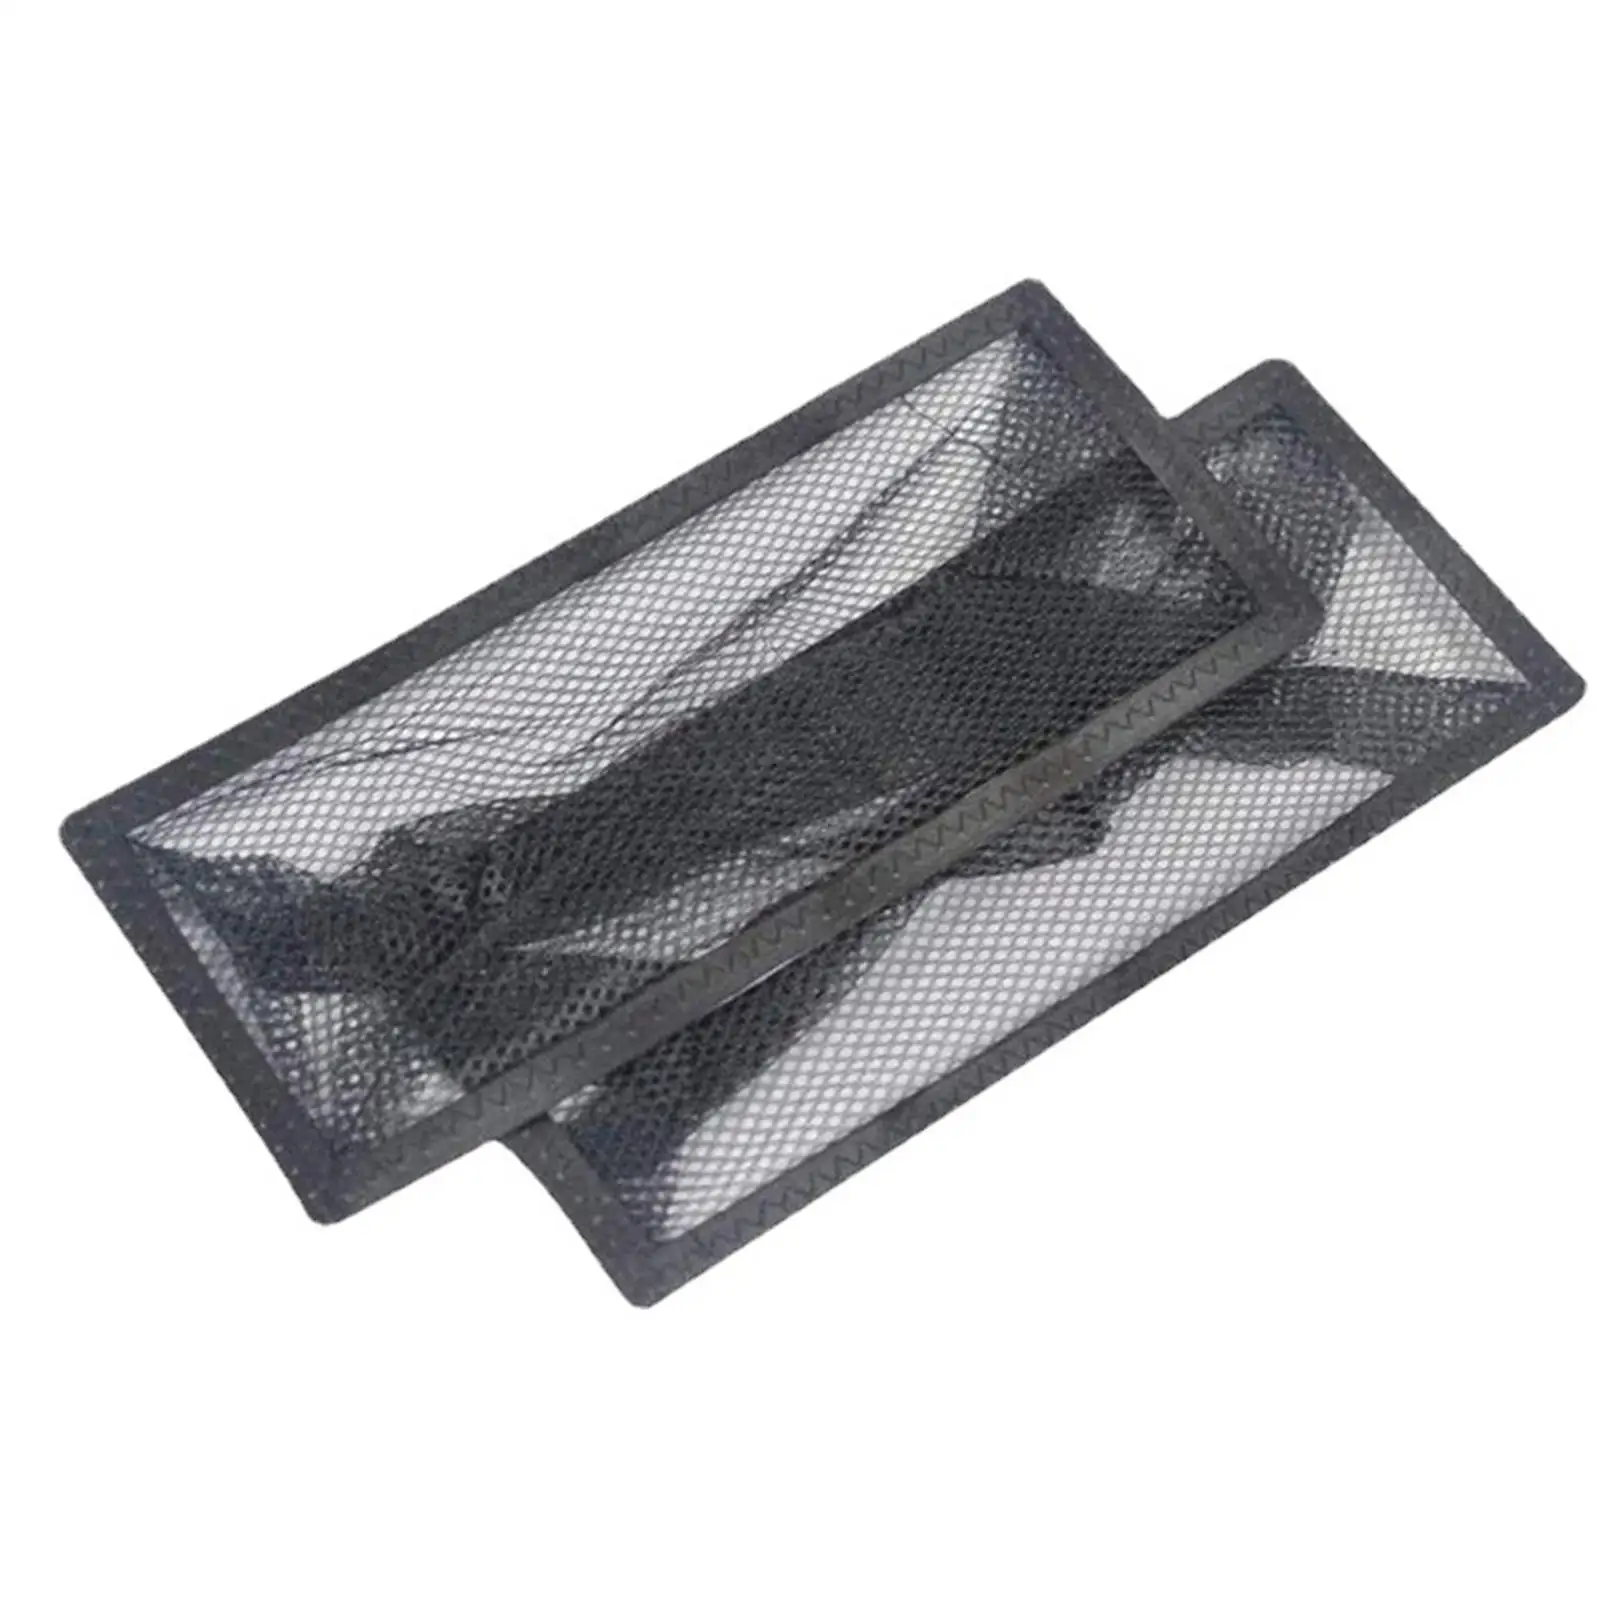 

2 Pieces Floor Register Cover Portable Lightweight Garbage Dust Collection Mesh Bag Rectangle for Bathroom Home Indoor Supplies